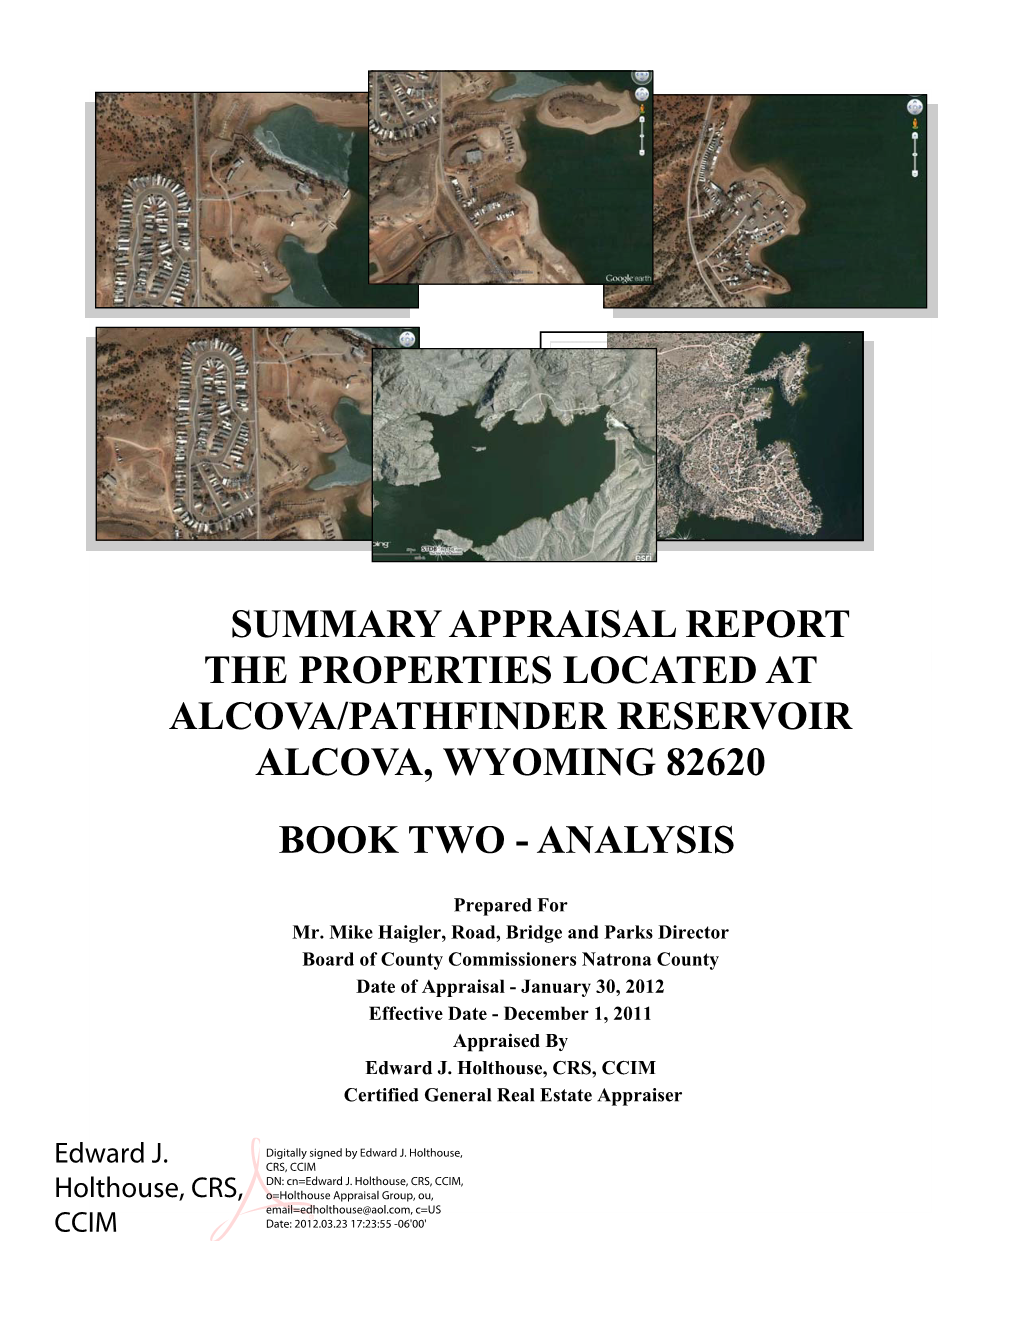 Summary Appraisal Report the Properties Located at Alcova/Pathfinder Reservoir Alcova, Wyoming 82620 Book Two - Analysis